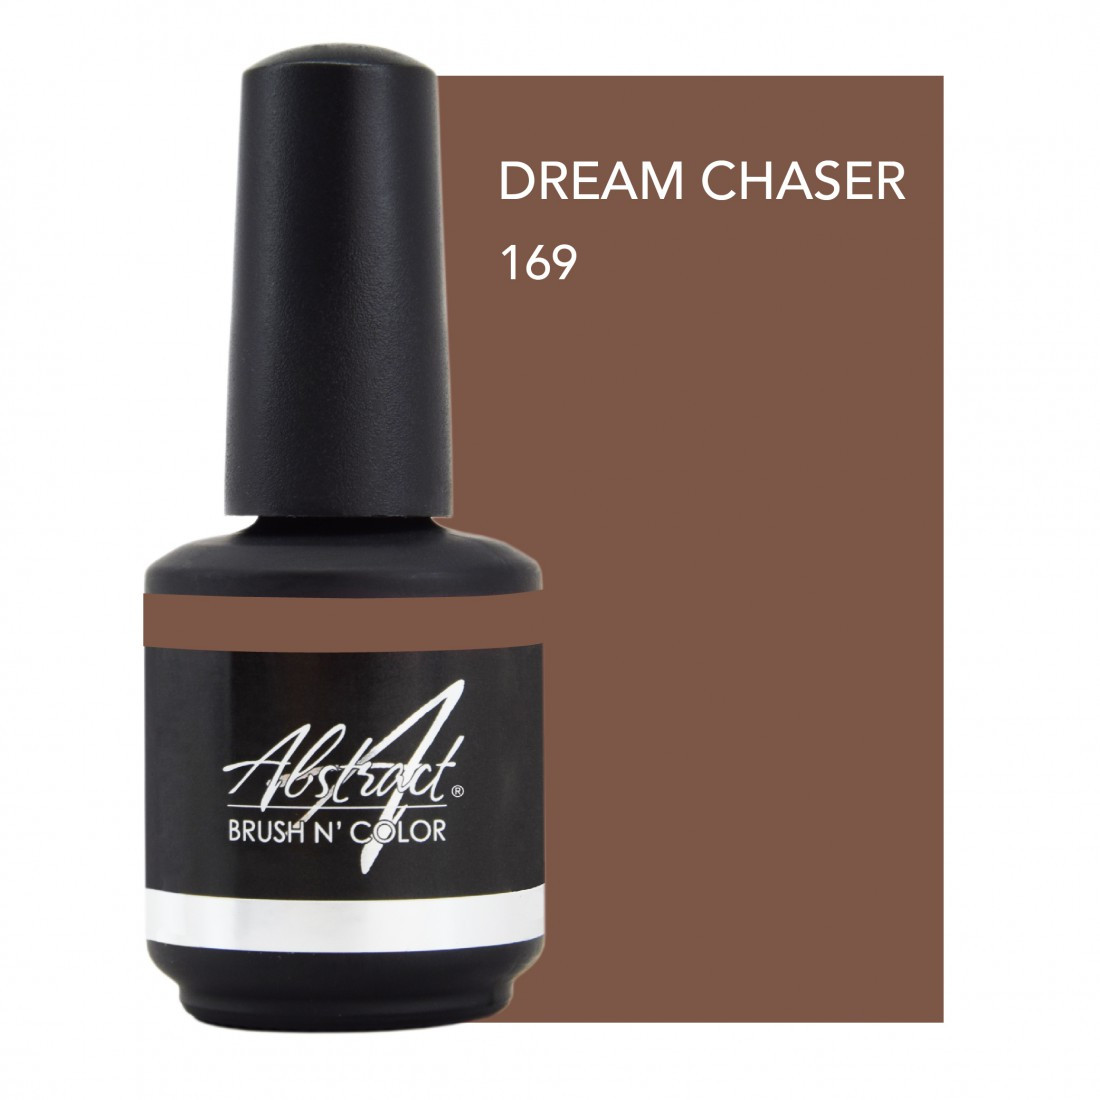 Abstract Dream chaser 15 ml